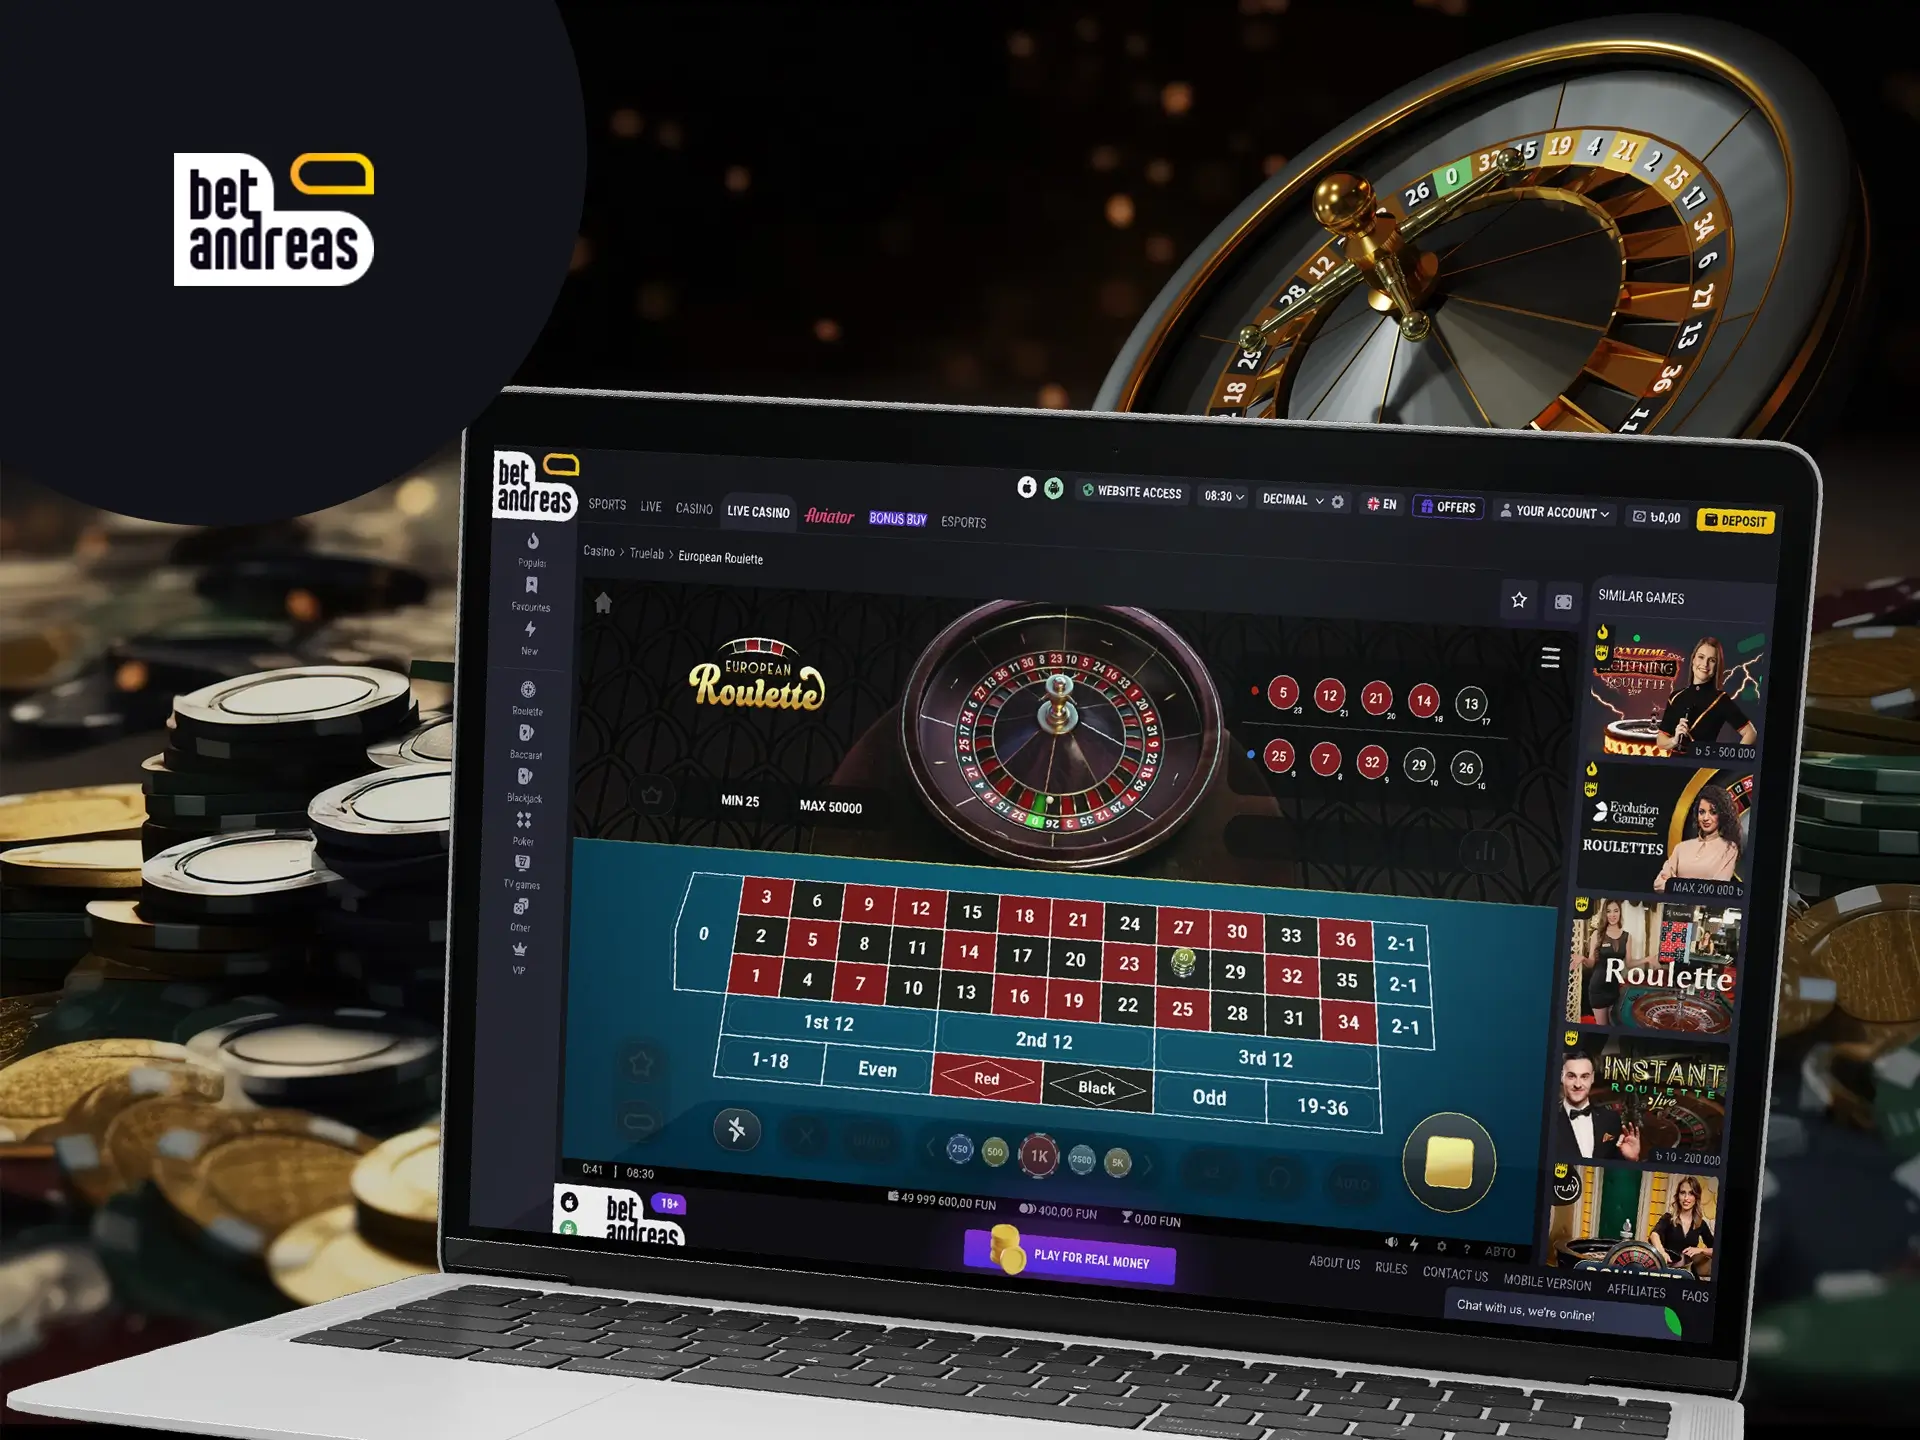 Try your hand at roulette from BetAndreas.